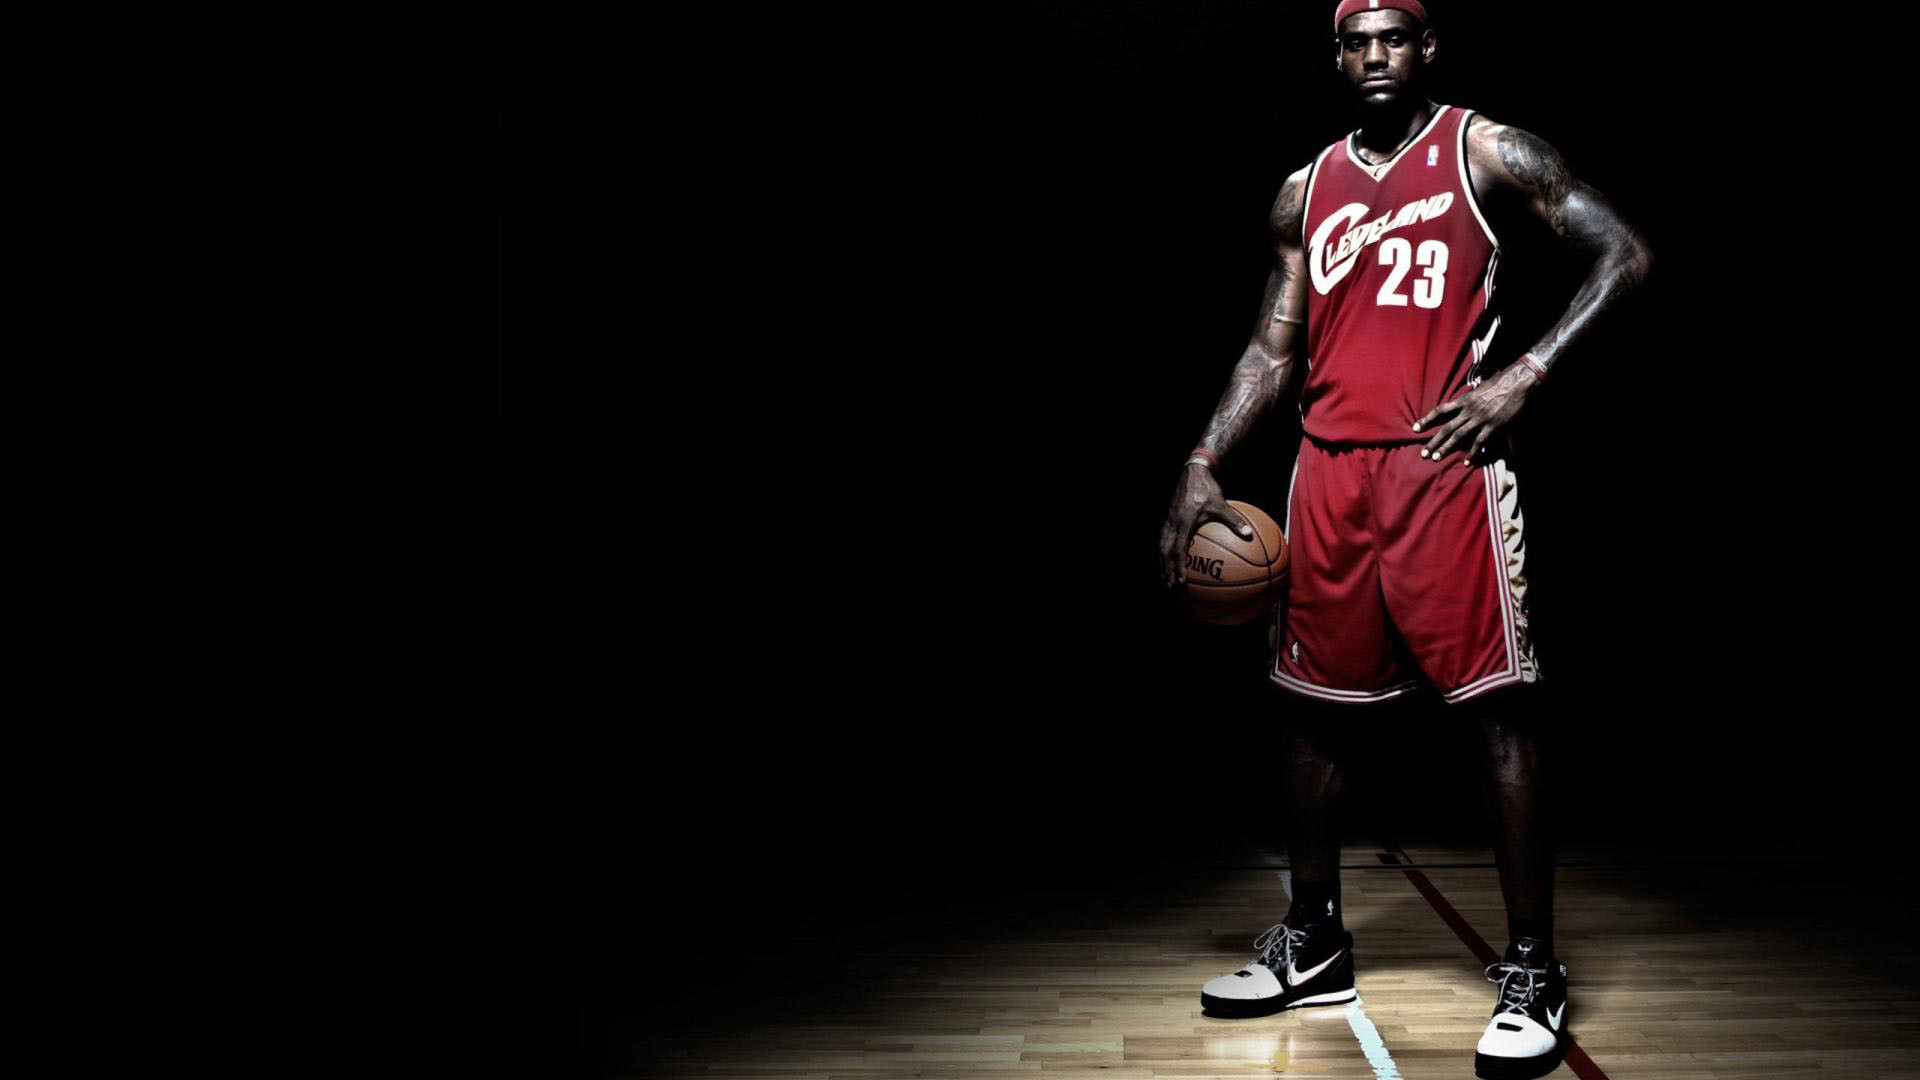 1920x1080 Lebron James Wallpapers 2016 Wallpaper Cave - HD Wallpapers